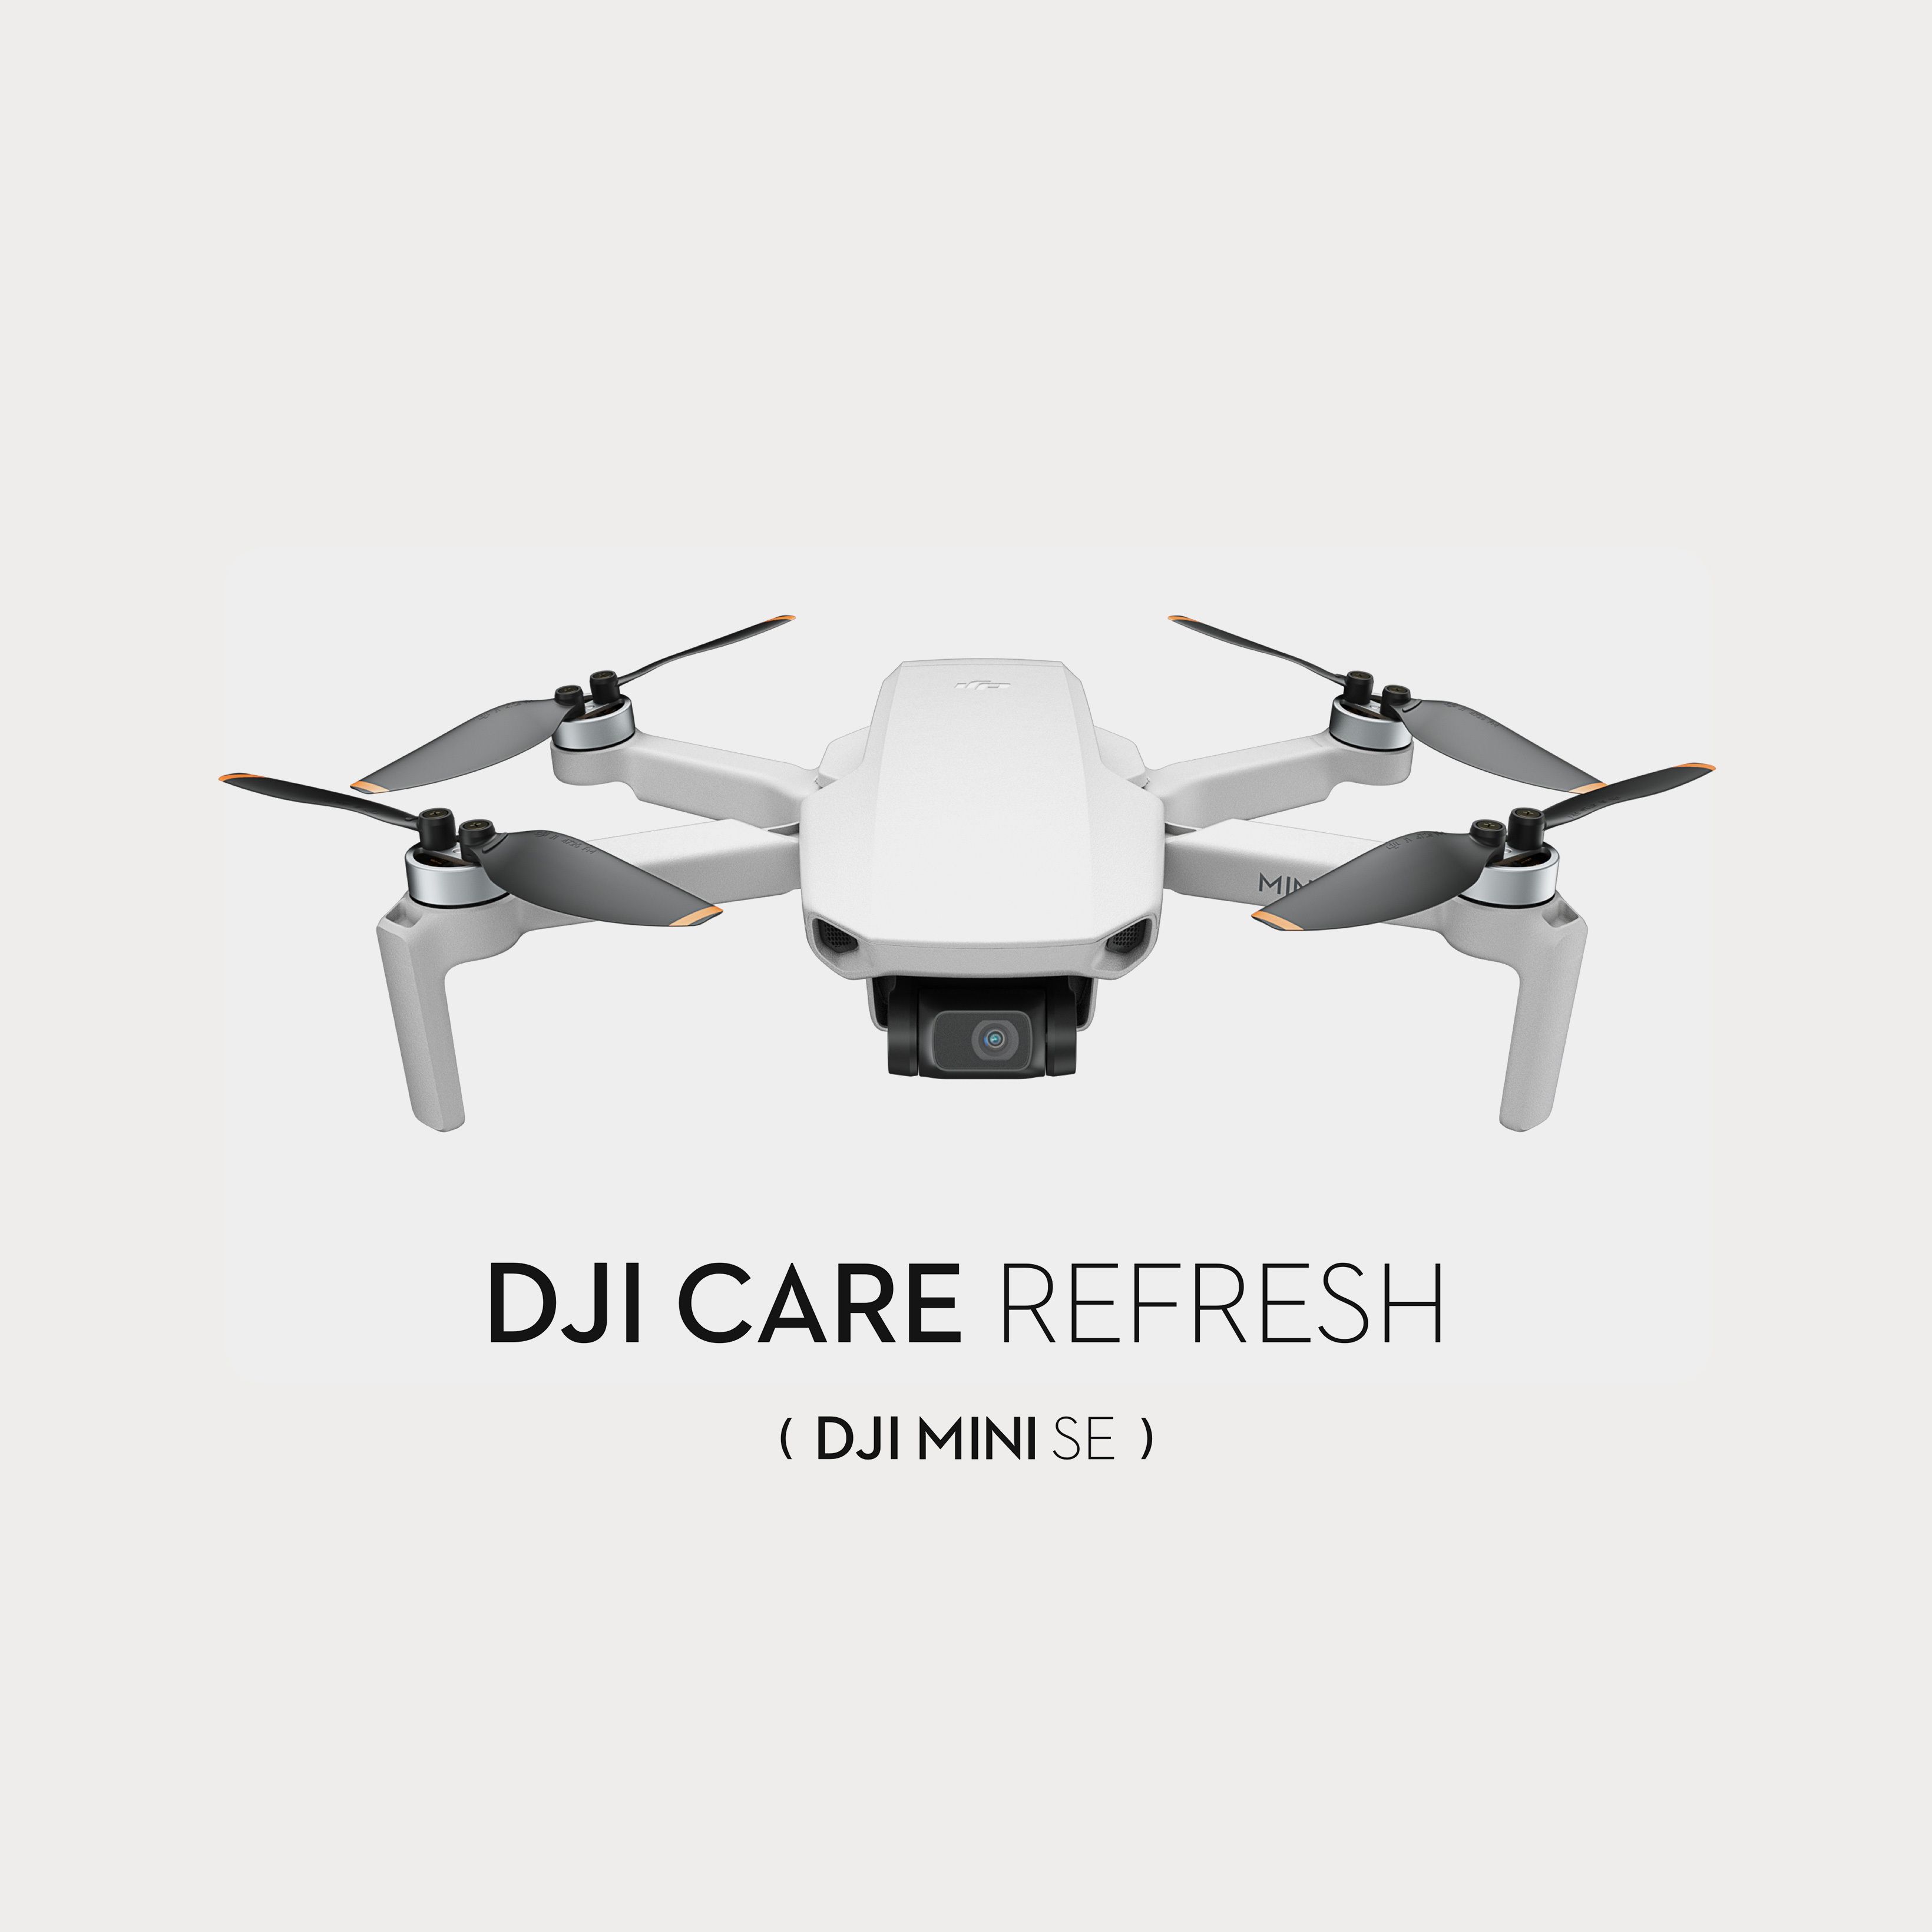 DJI Care Refresh for Phone Gimbals - Osmo Mobile 6 / 1-Year Plan ...